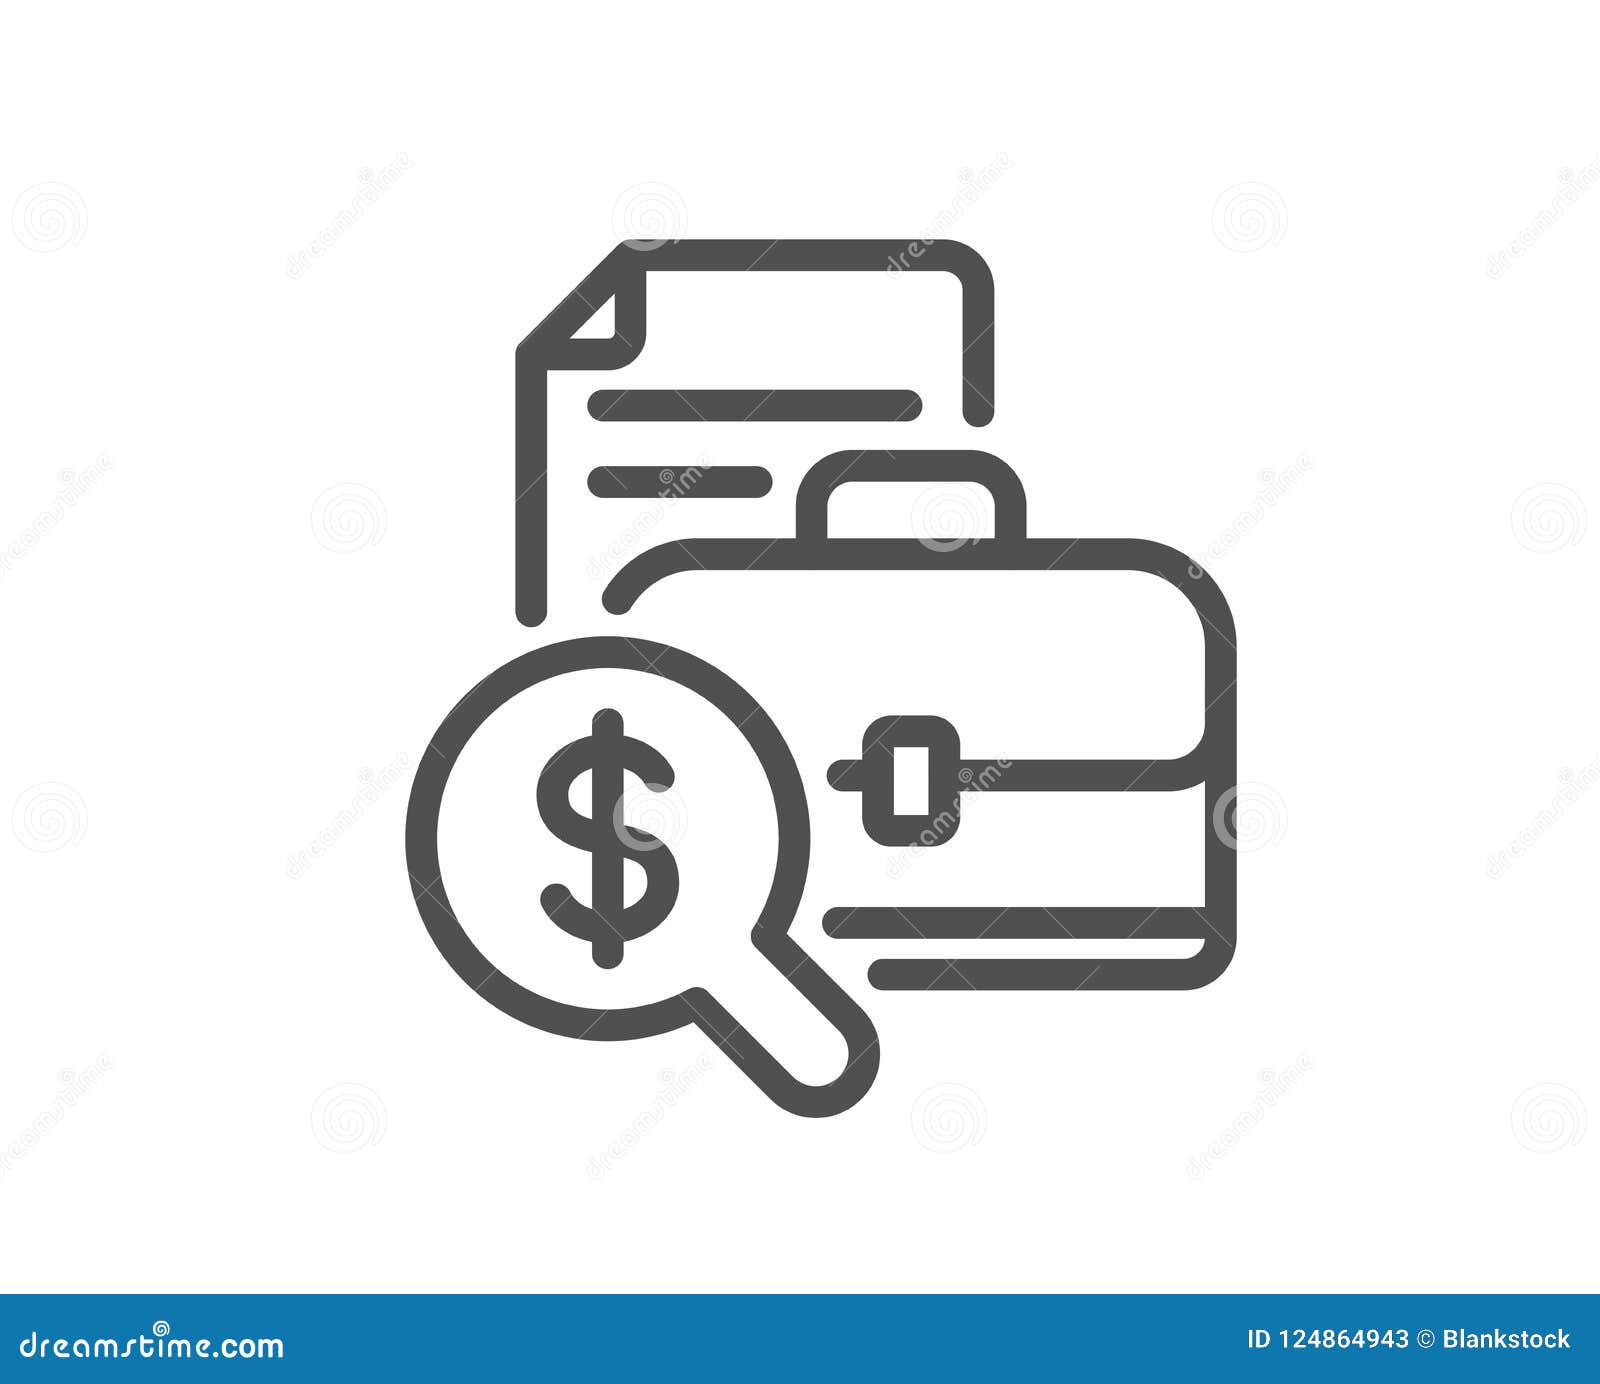 Accounting report line icon. Audit sign. Check finance symbol